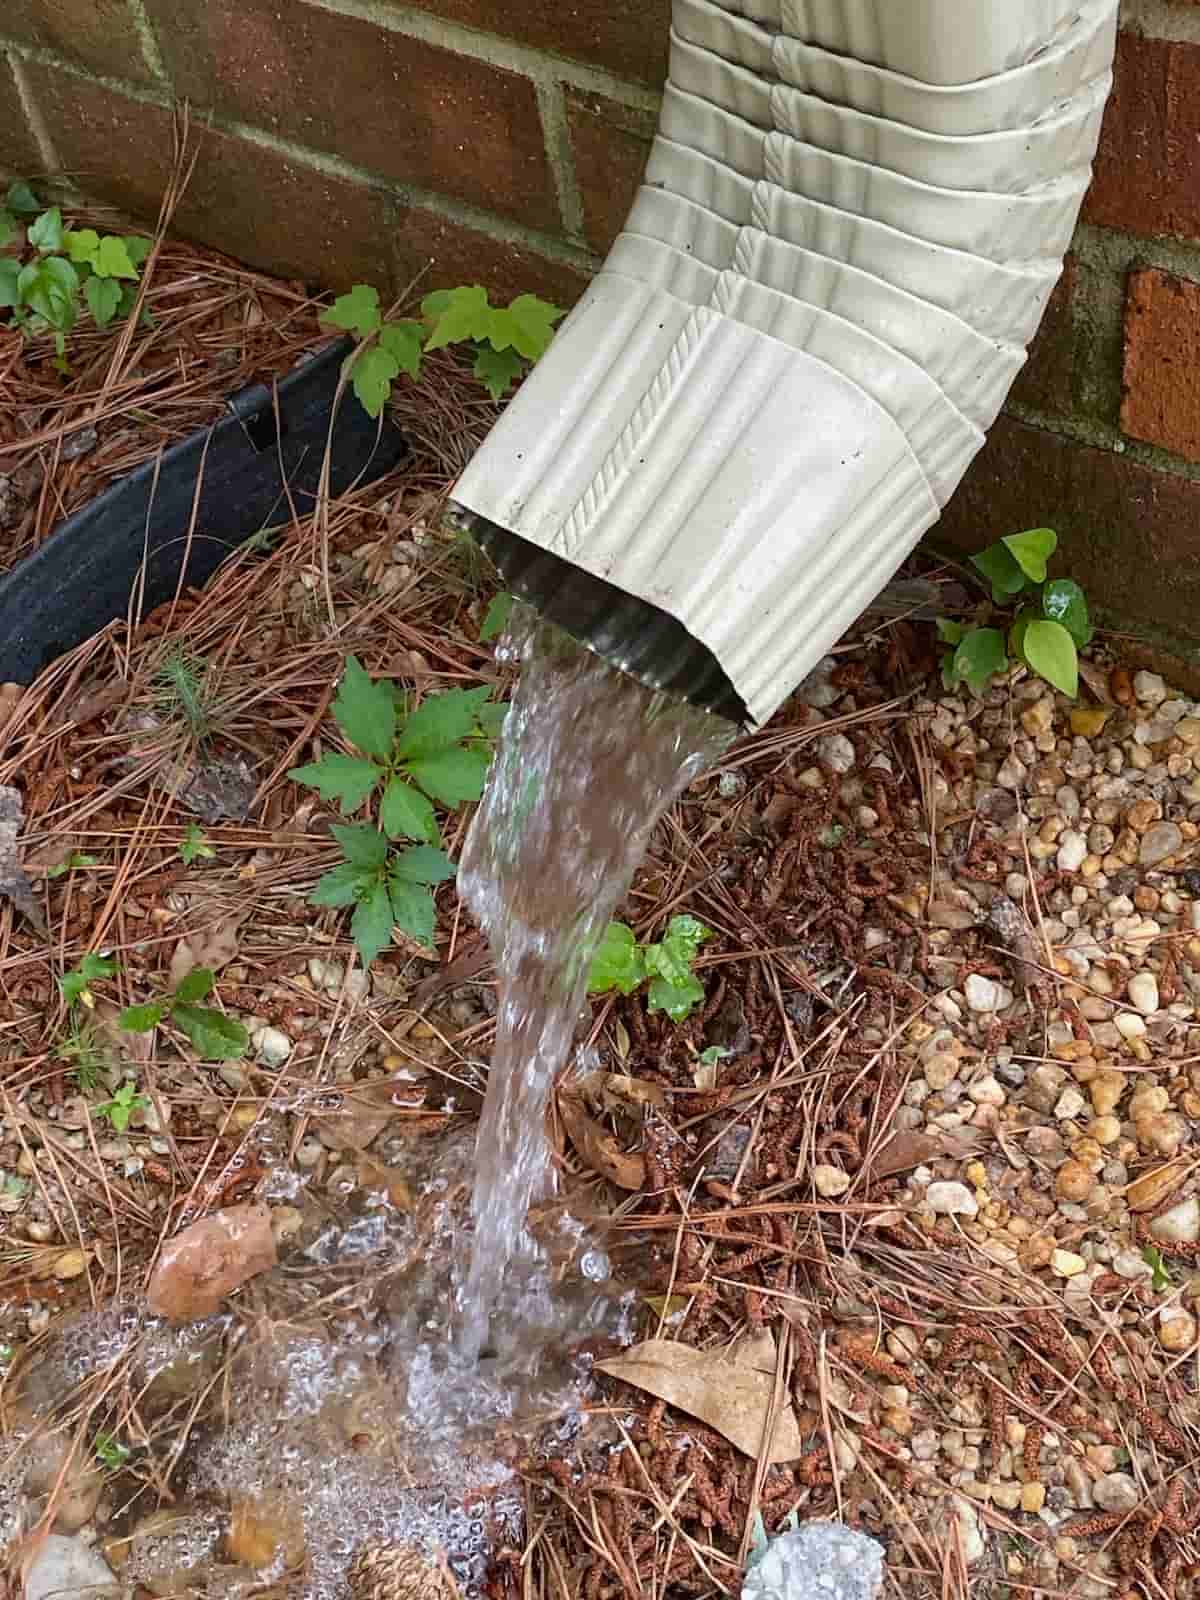 cleaning vinyl gutters